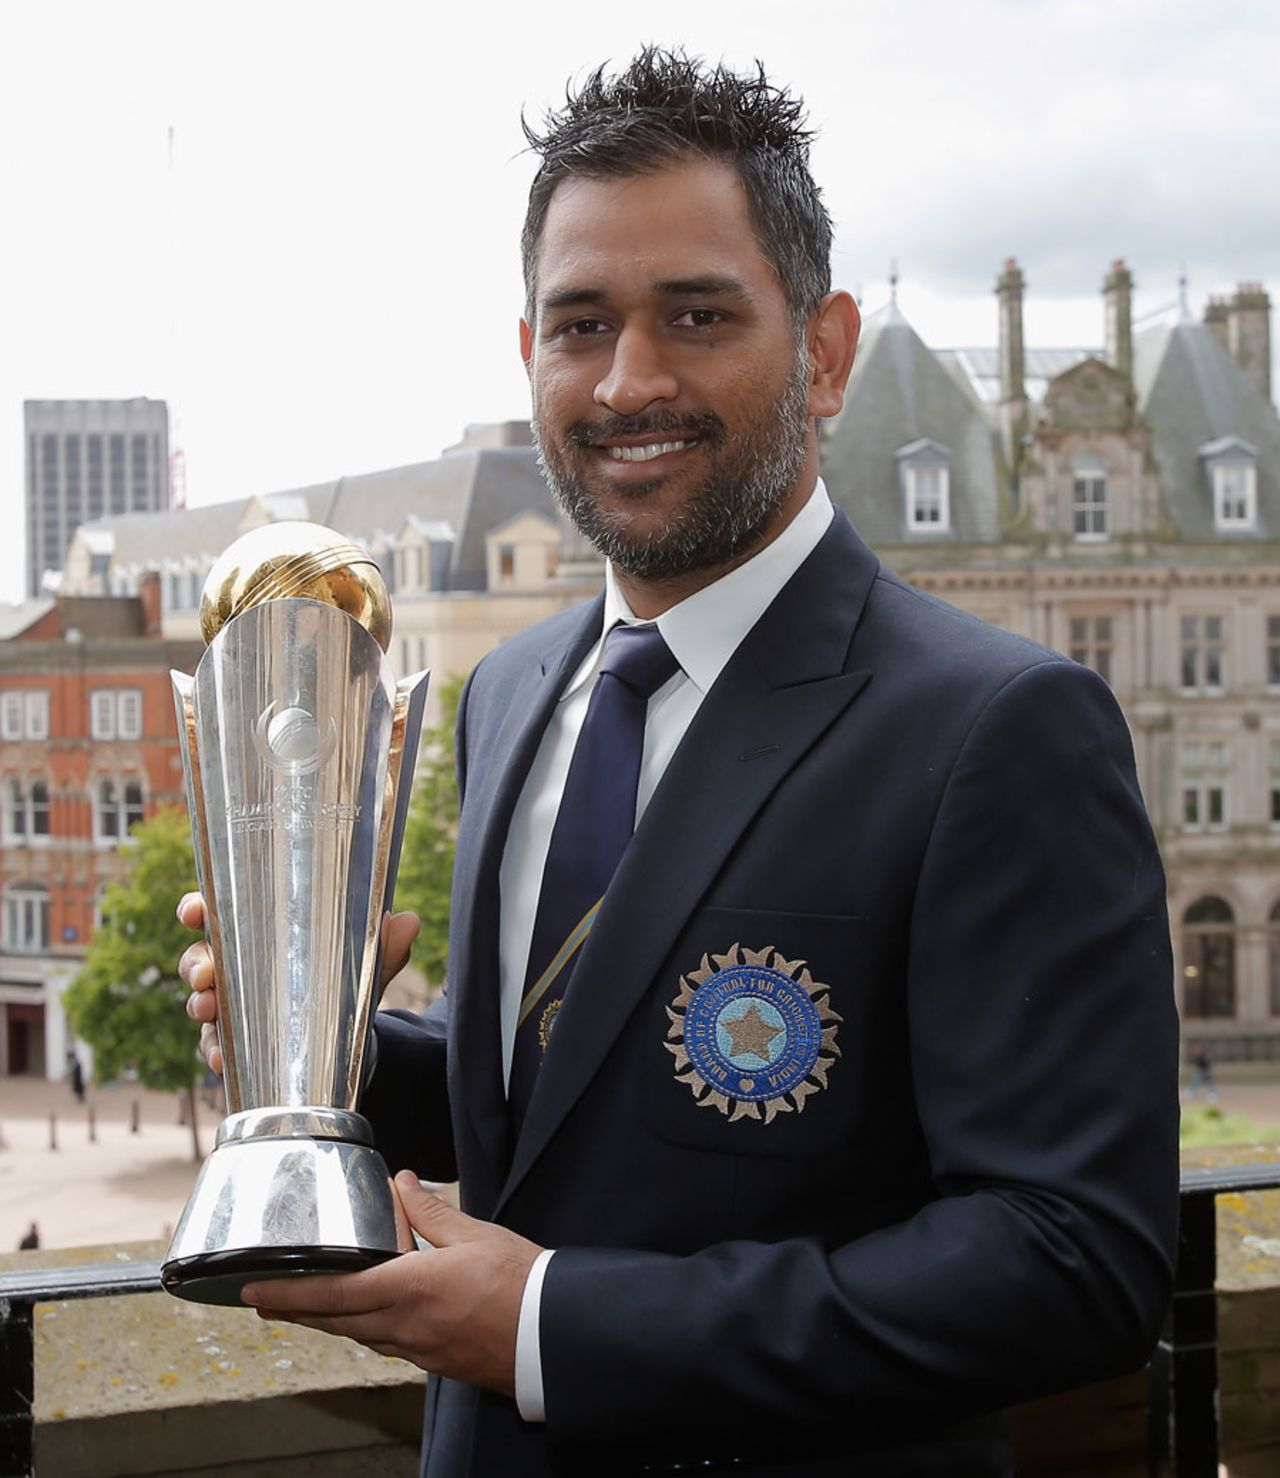 MS Dhoni with the Champions Trophy, England v India, Champions Trophy final, Edgbaston, June 23, 2013